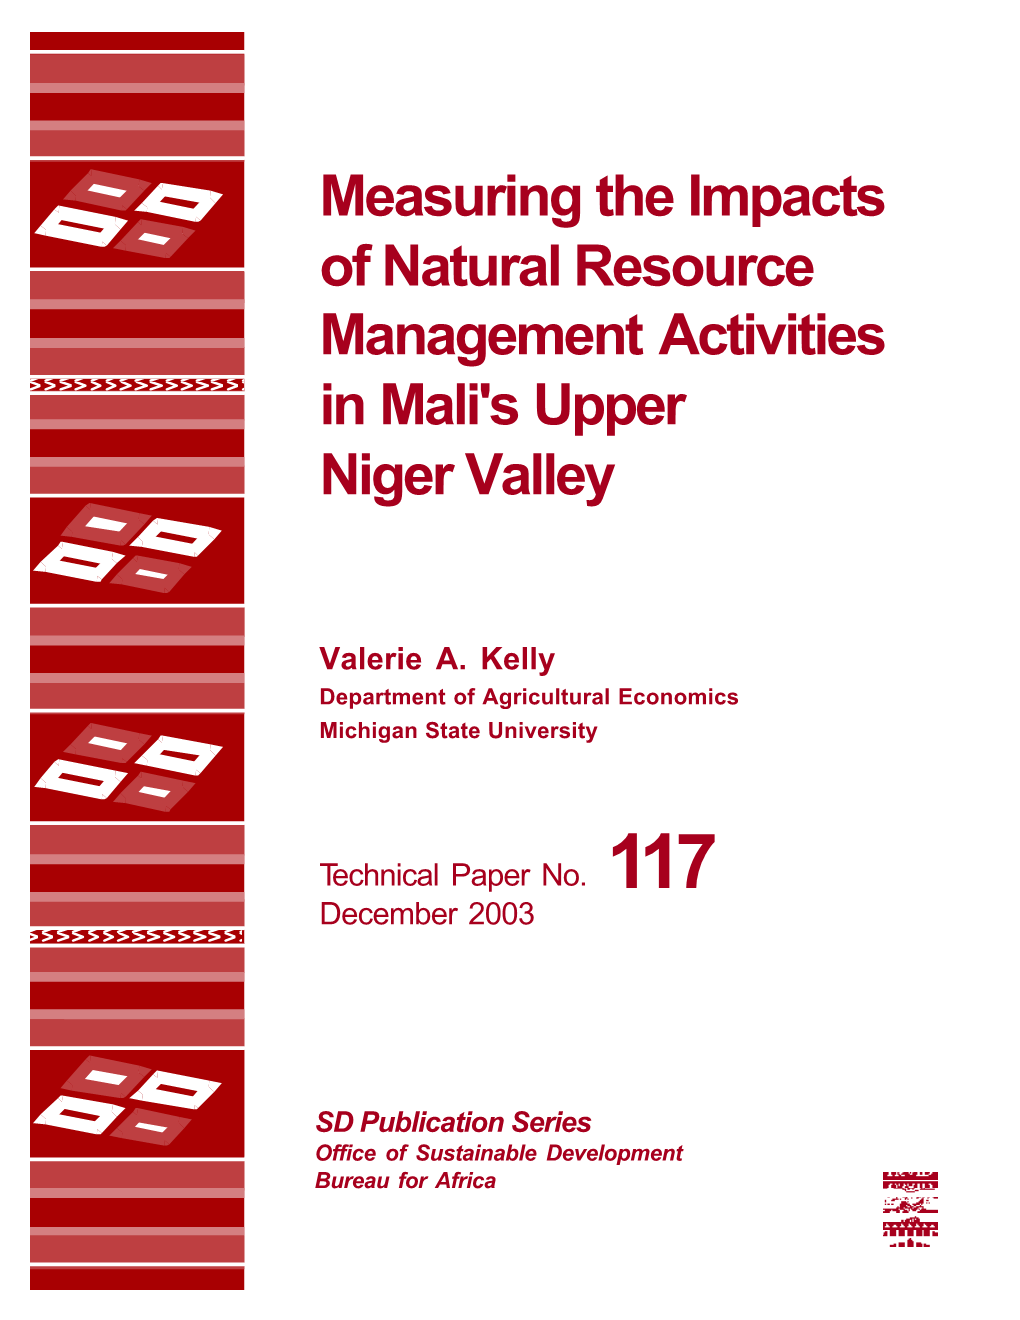 Measuring the Impacts of Natural Resource Management Activities in Mali's Upper Niger Valley